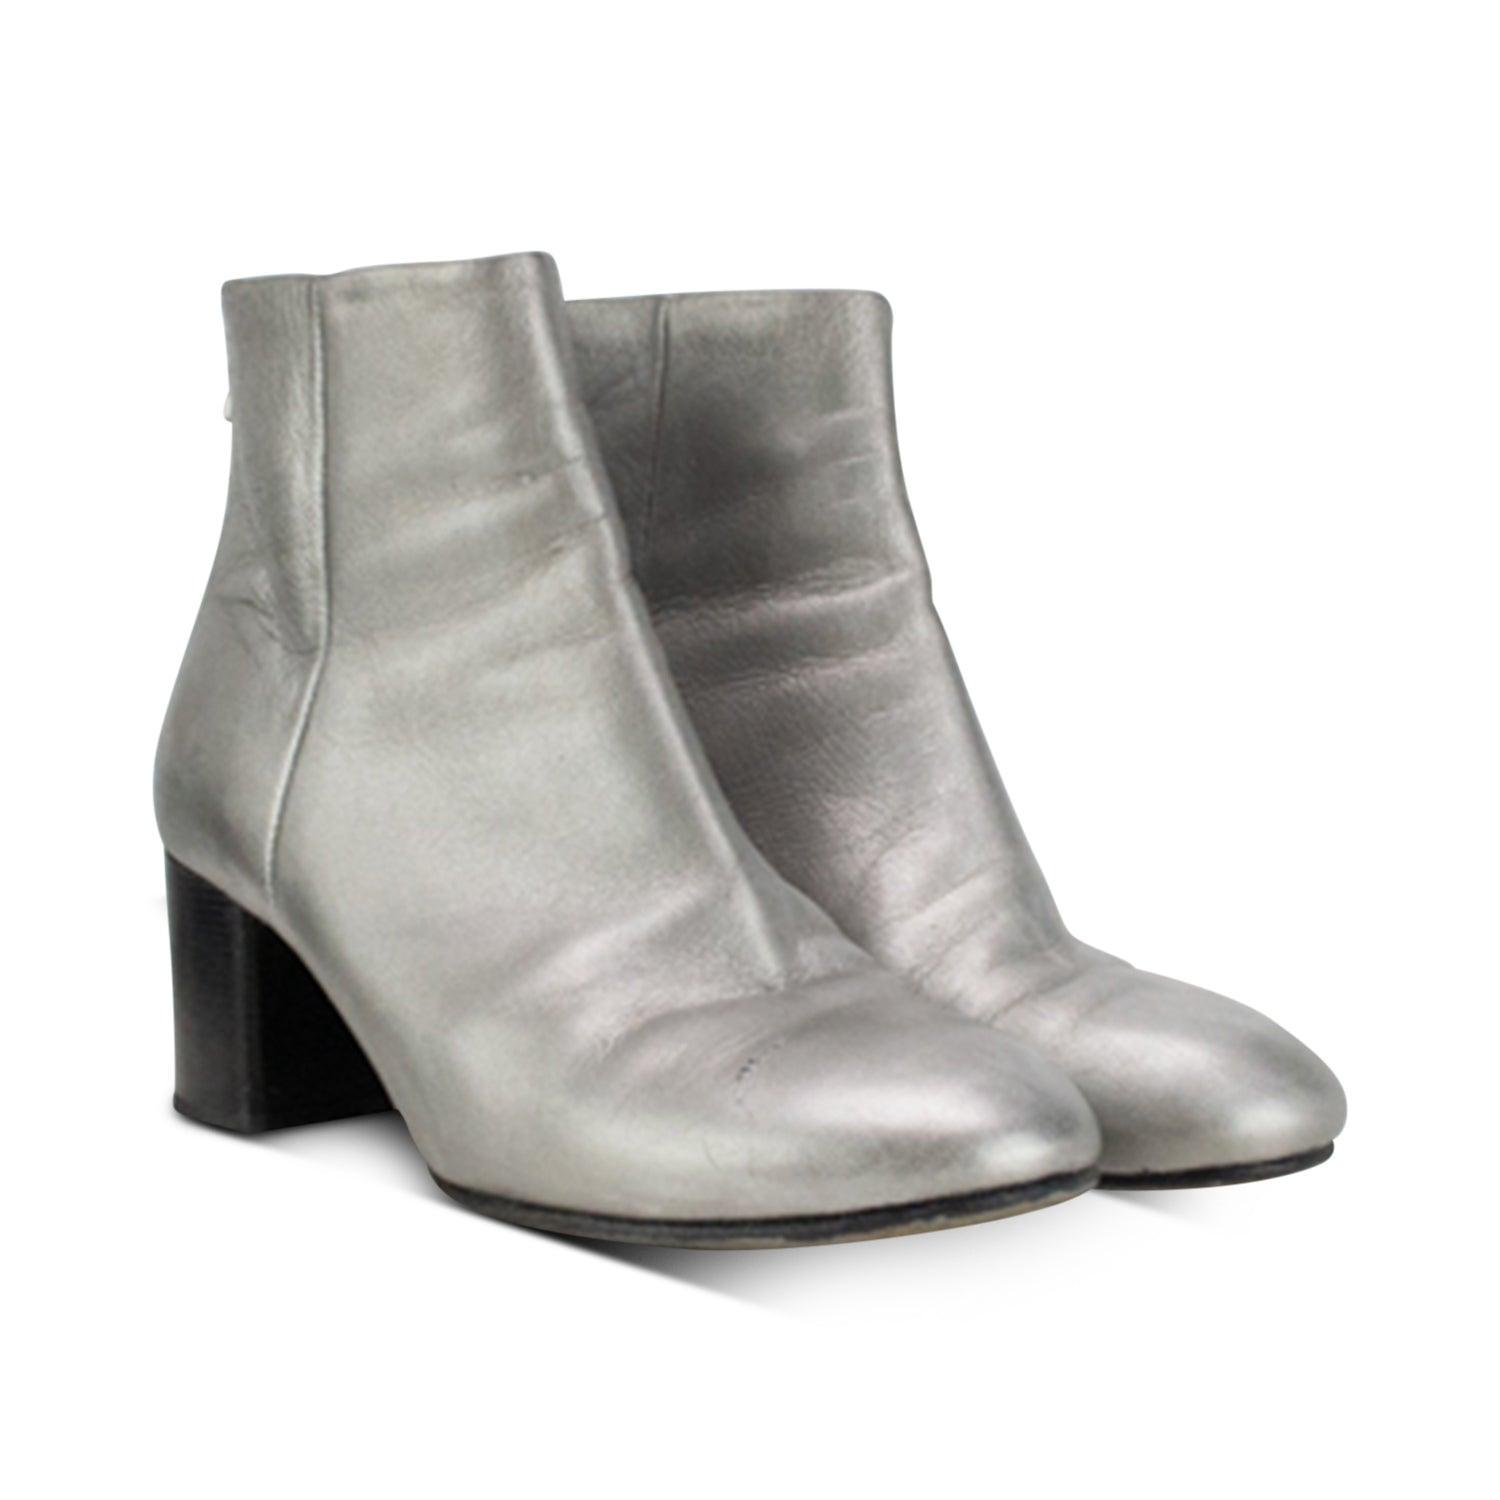 Rag & Bone Ankle Boots - Women's 38.5 - Fashionably Yours